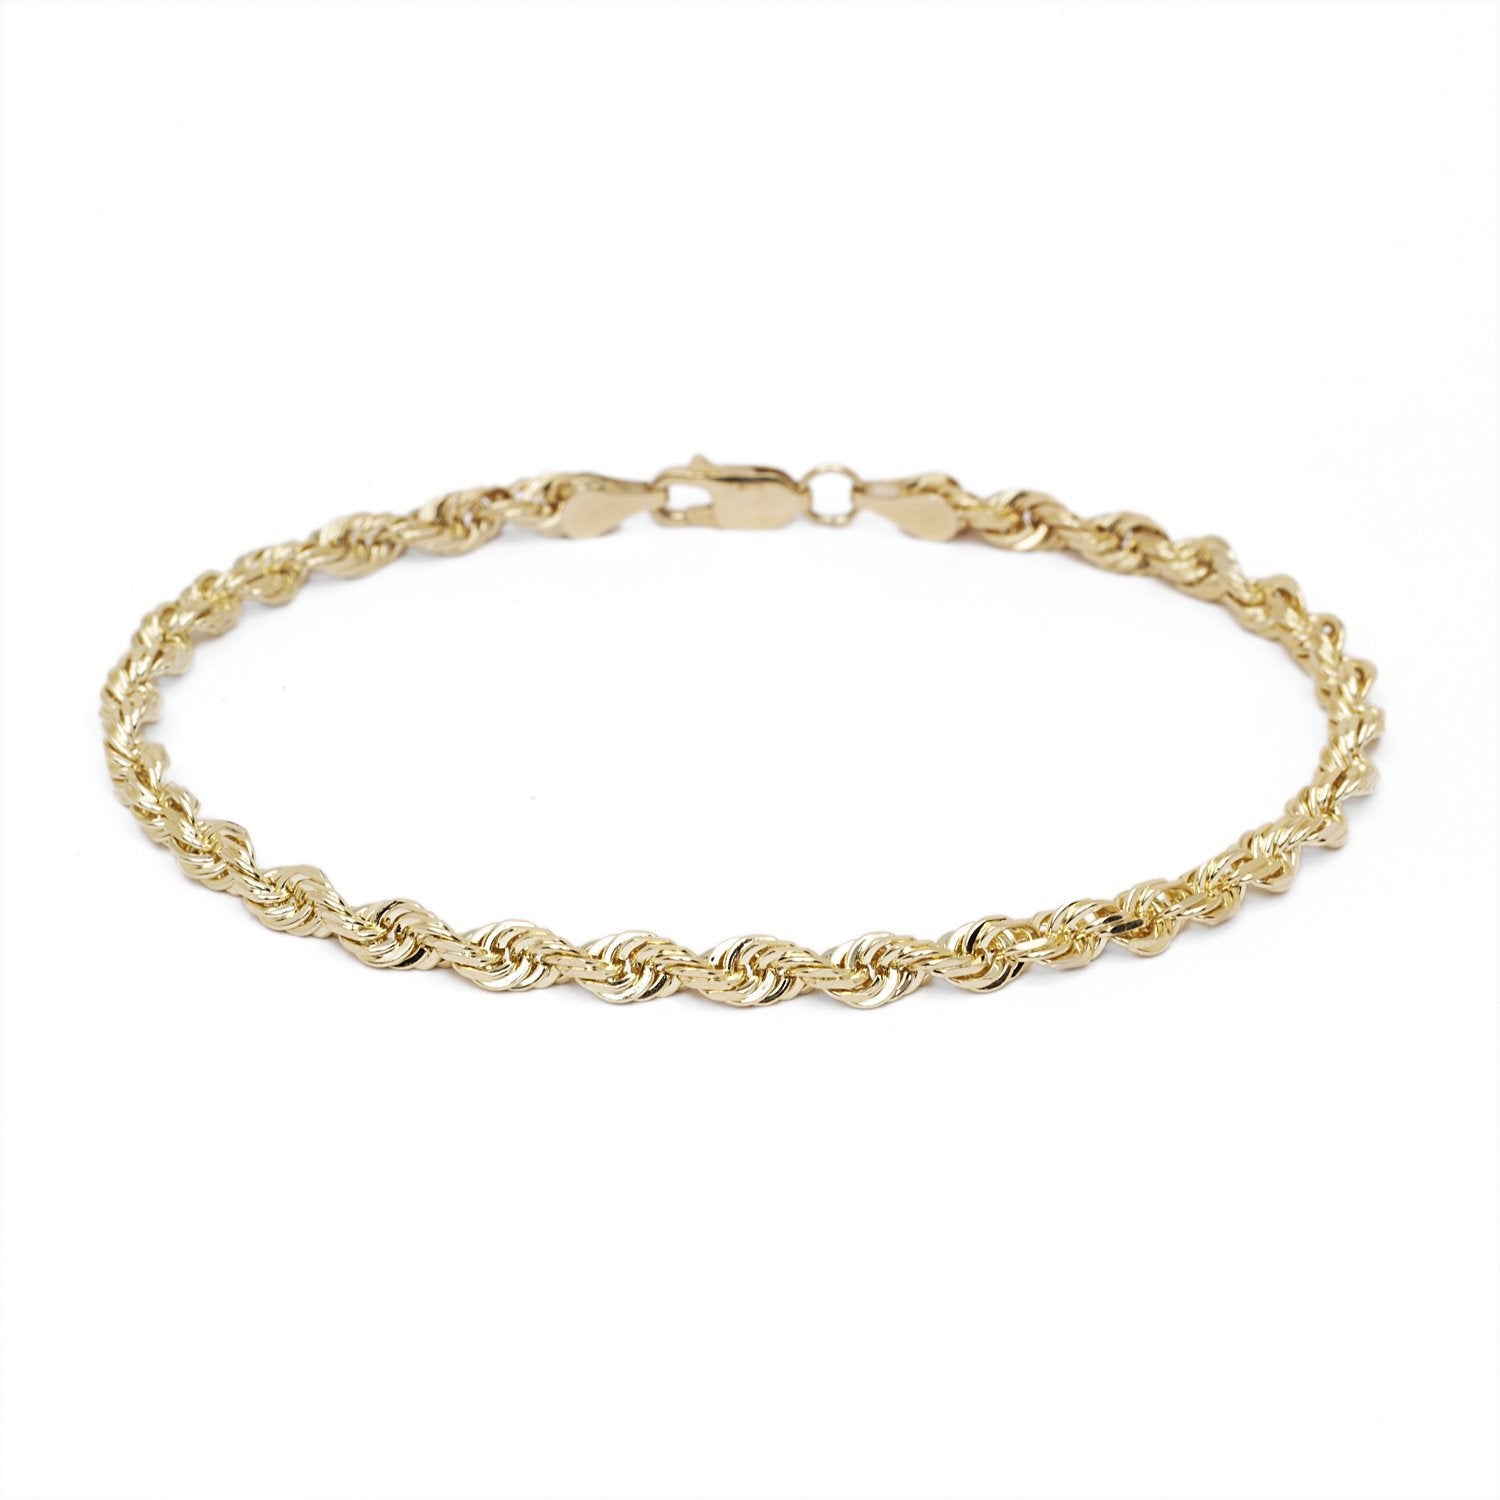 10k Yellow Gold Hollow Rope Chain Bracelet and Anklet for Men & Women, 4mm